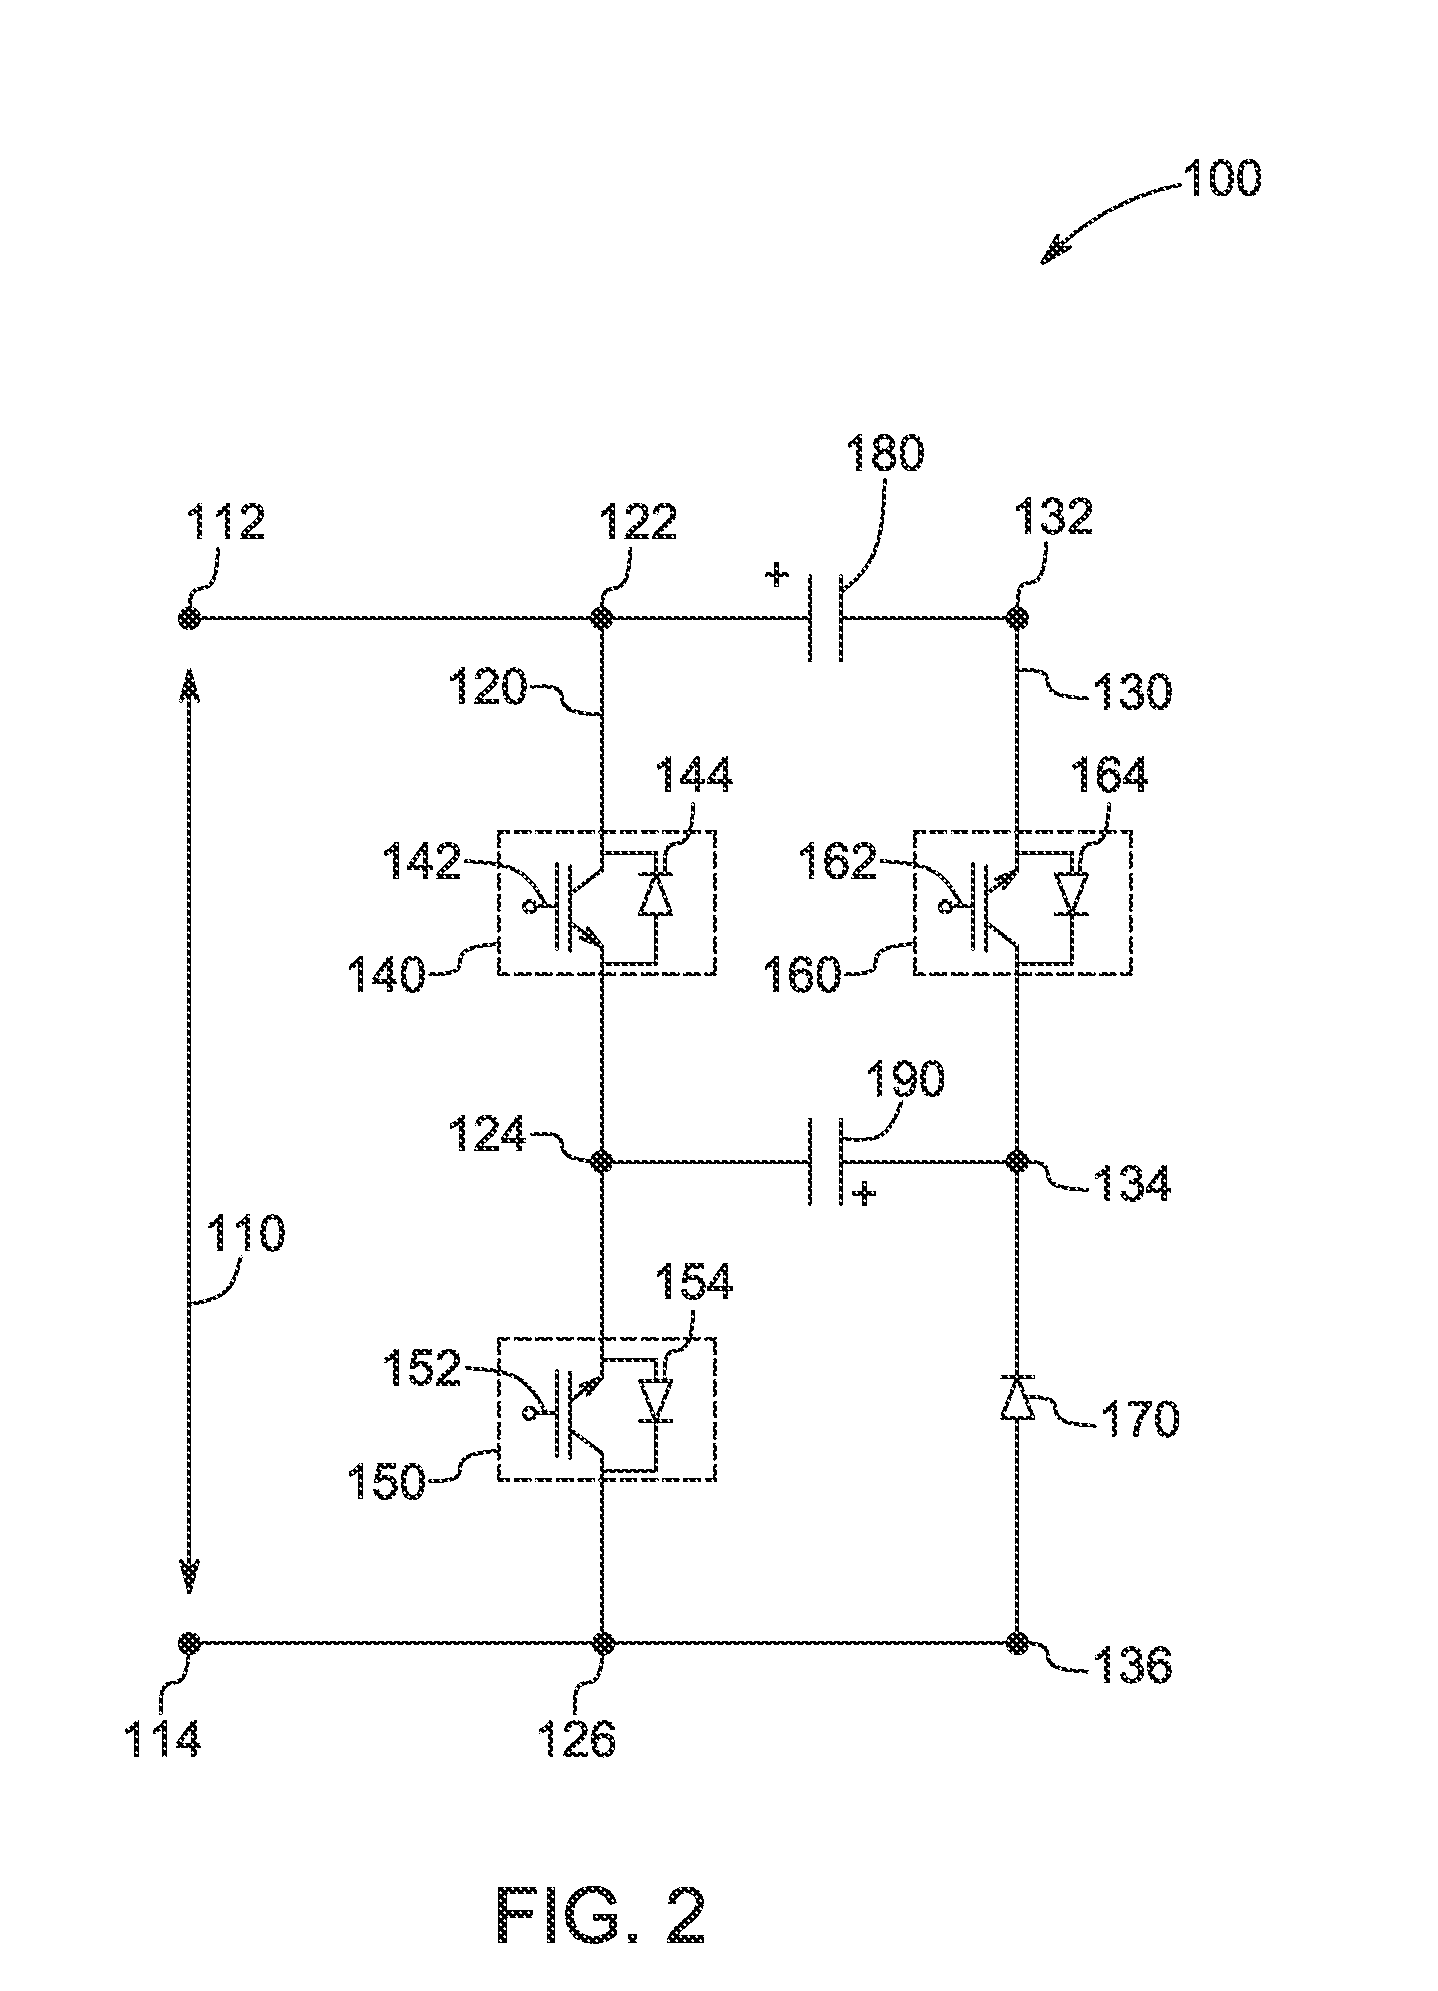 Modular multi-level power conversion system with DC fault current limiting capability